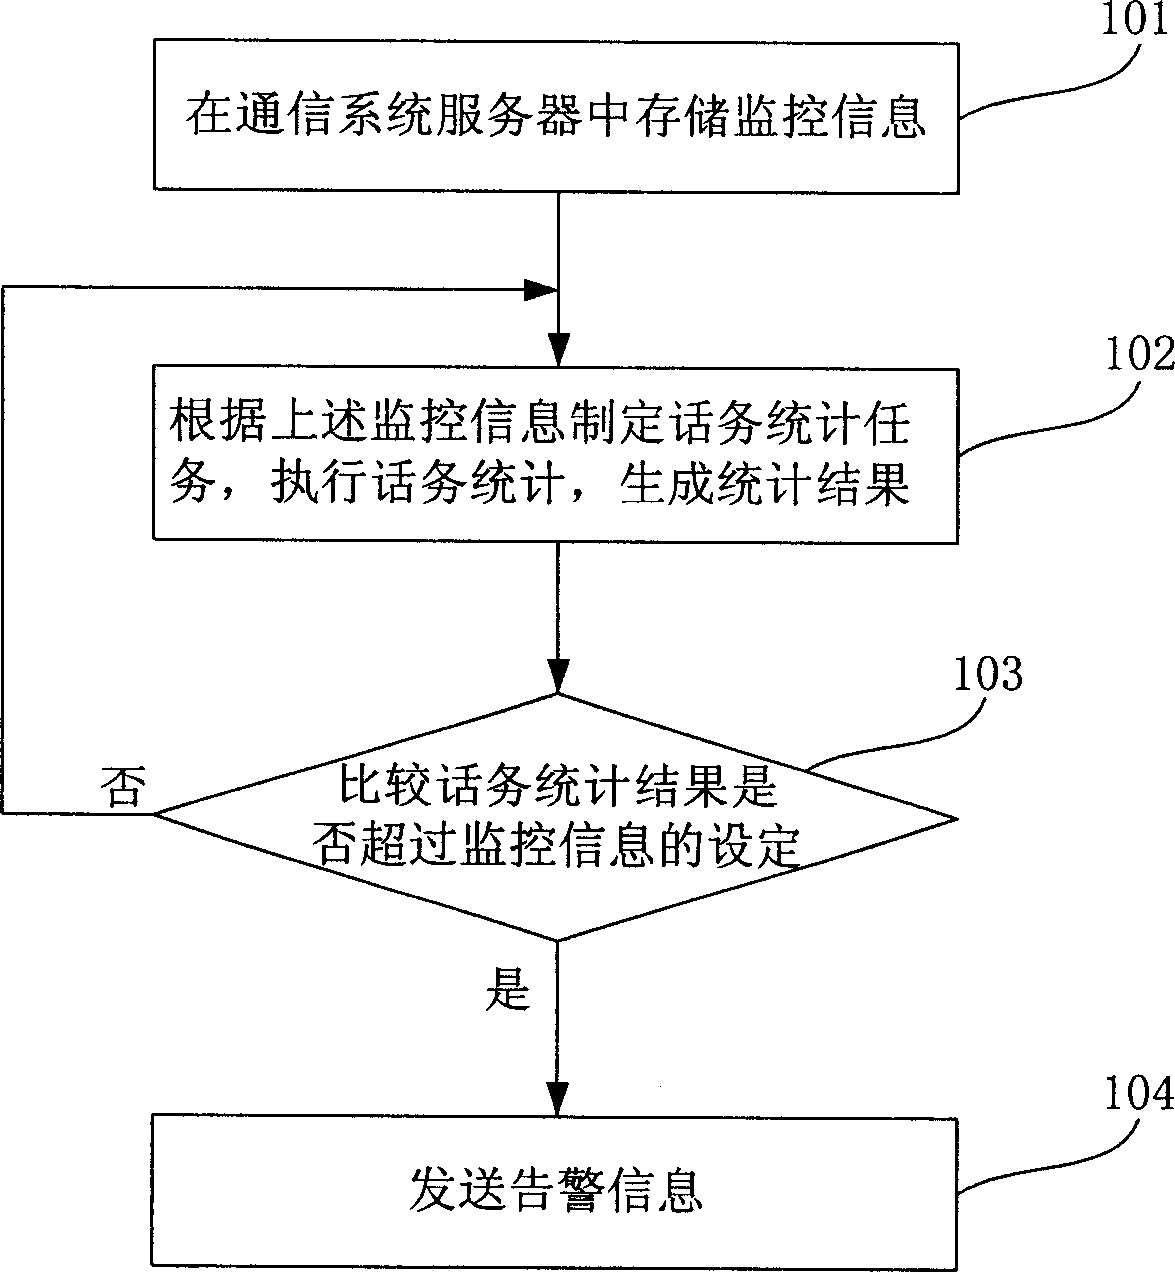 Communication system for implementing real-time monitoring warning and its method